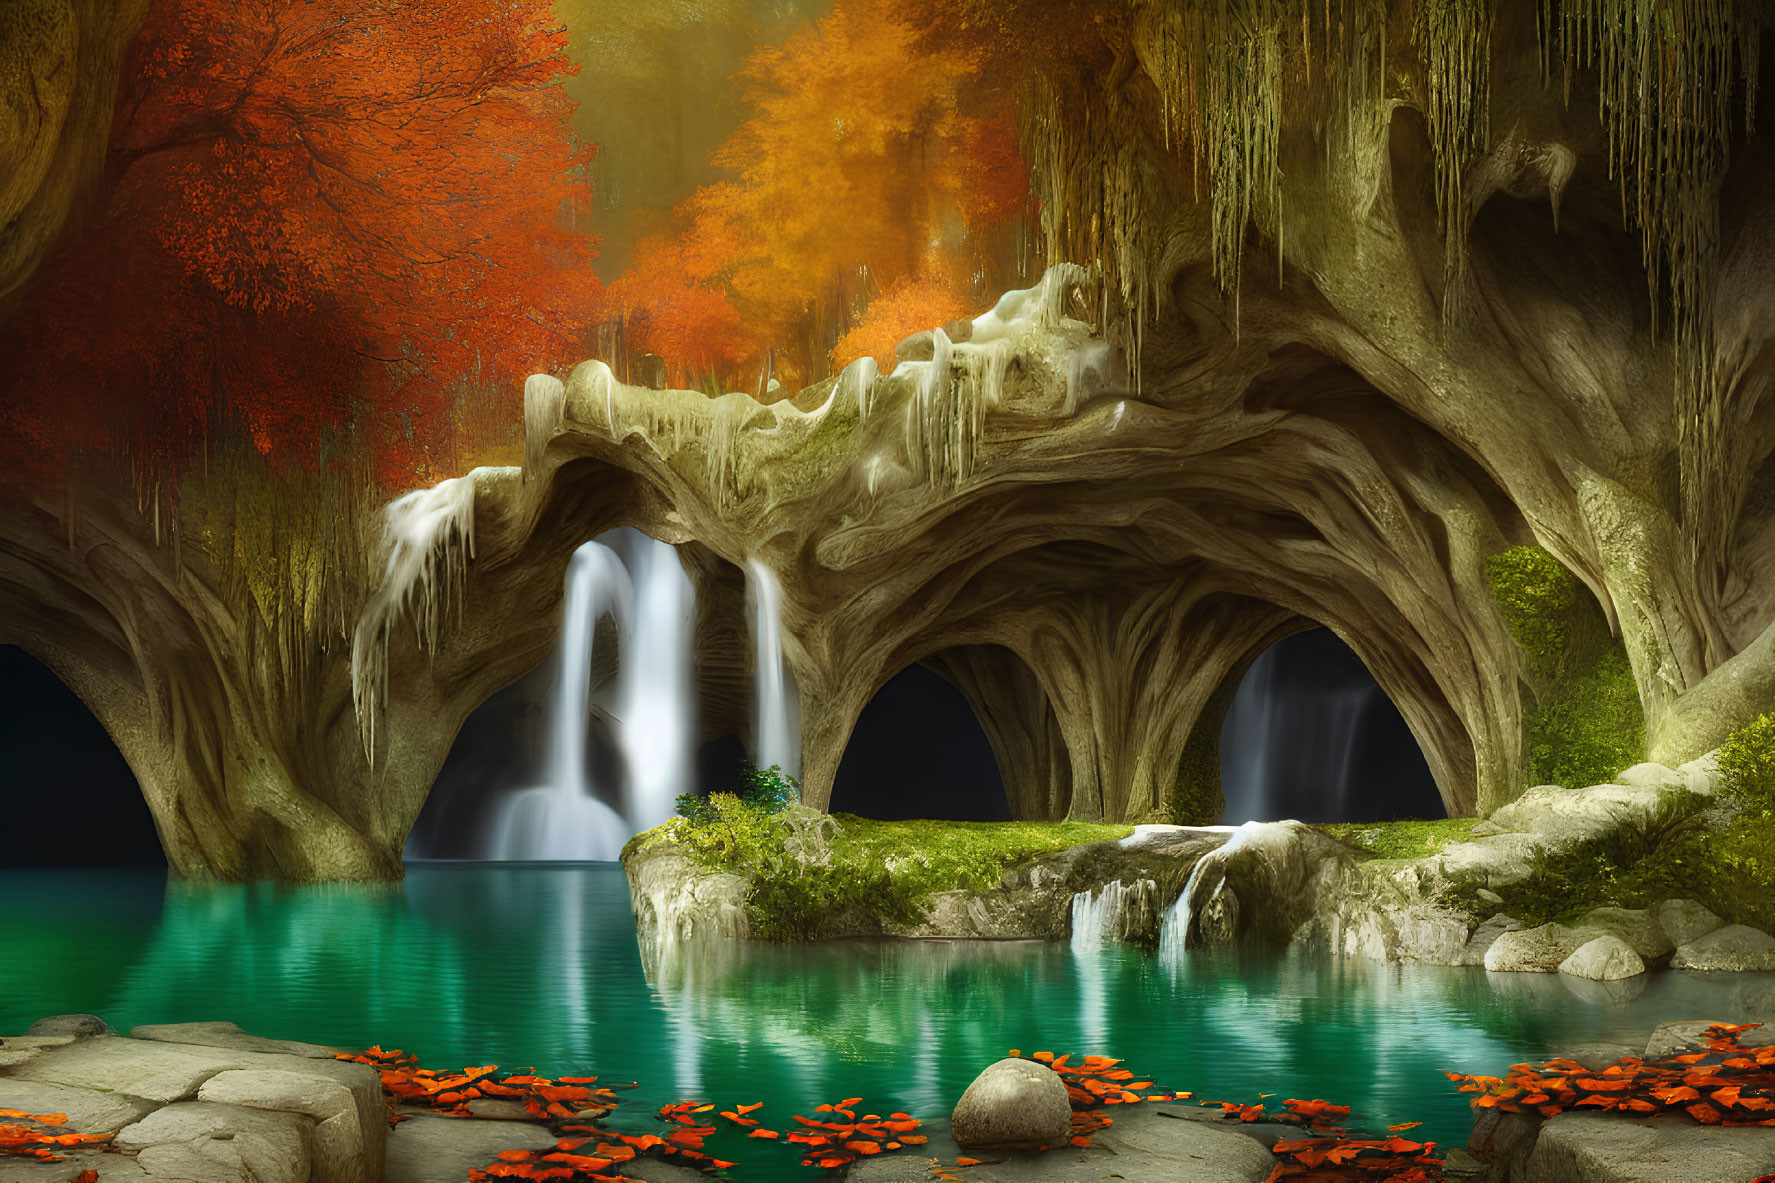 Fantasy landscape with tree-entwined waterfall and emerald pool surrounded by autumnal foliage.